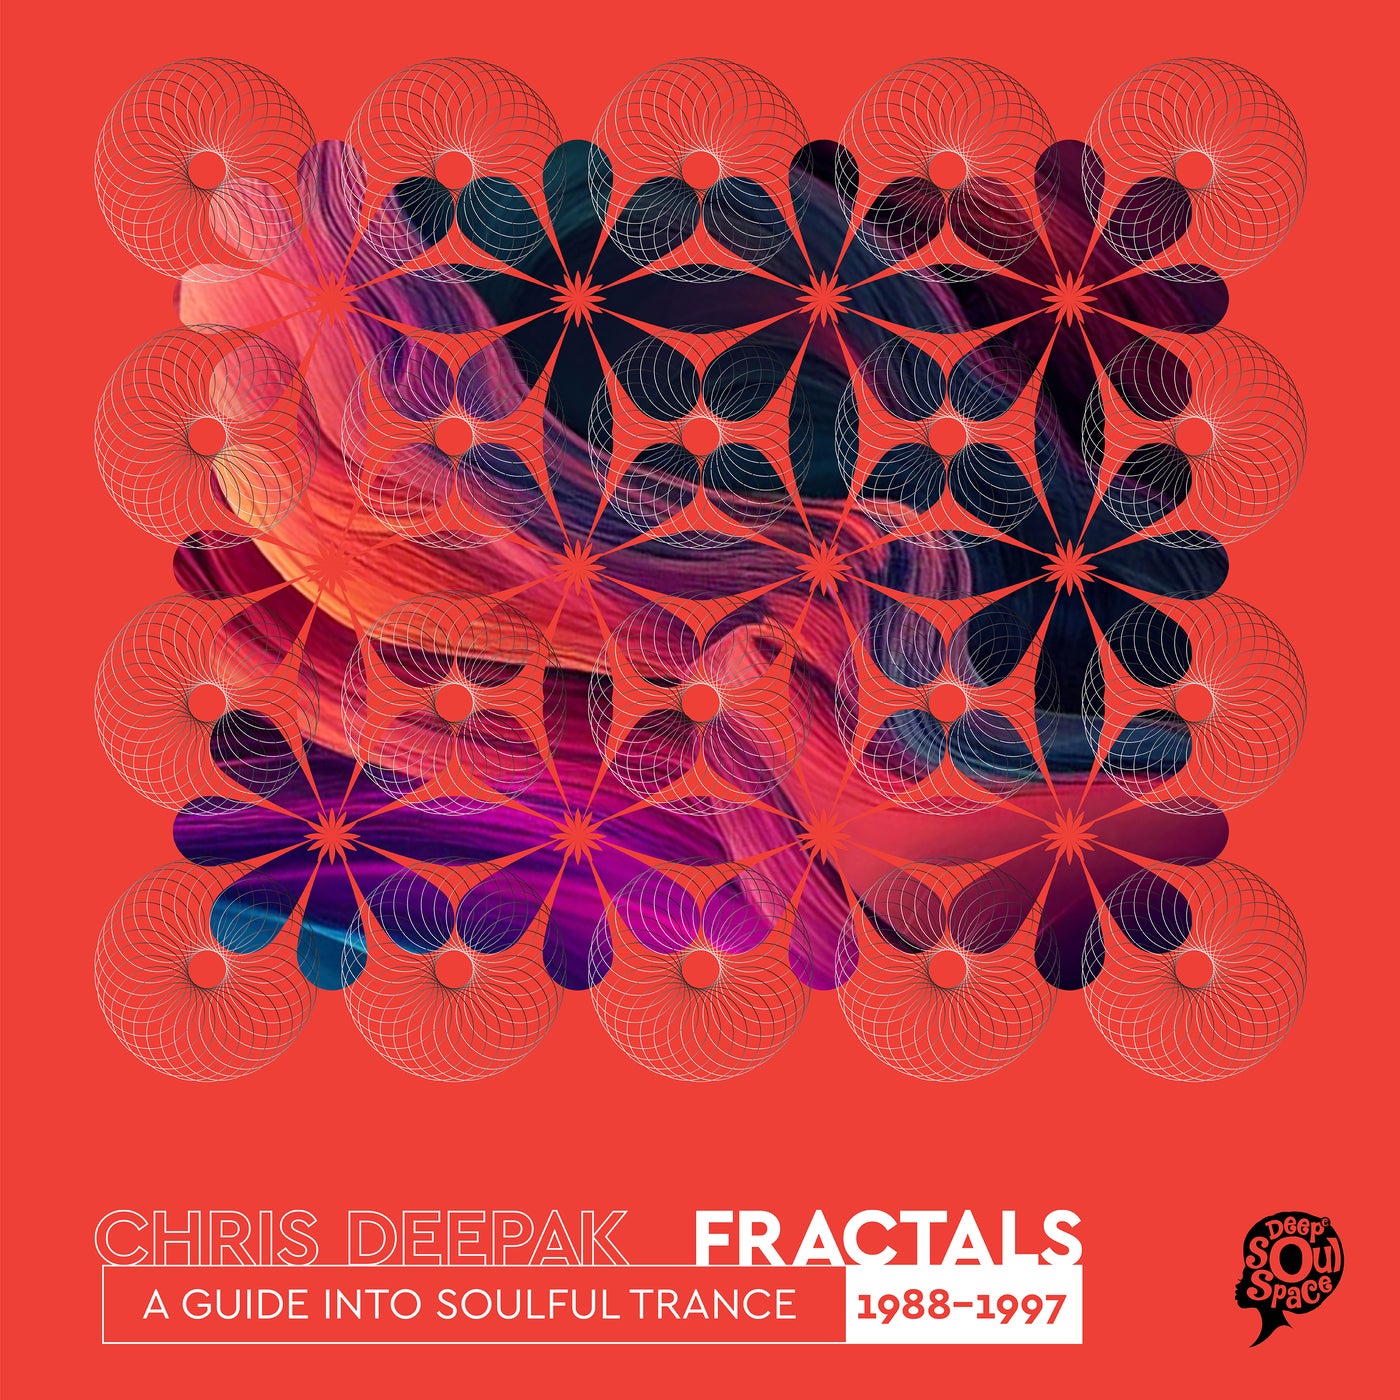 Fractals 88-97 (A guide Into Soulful Trance)